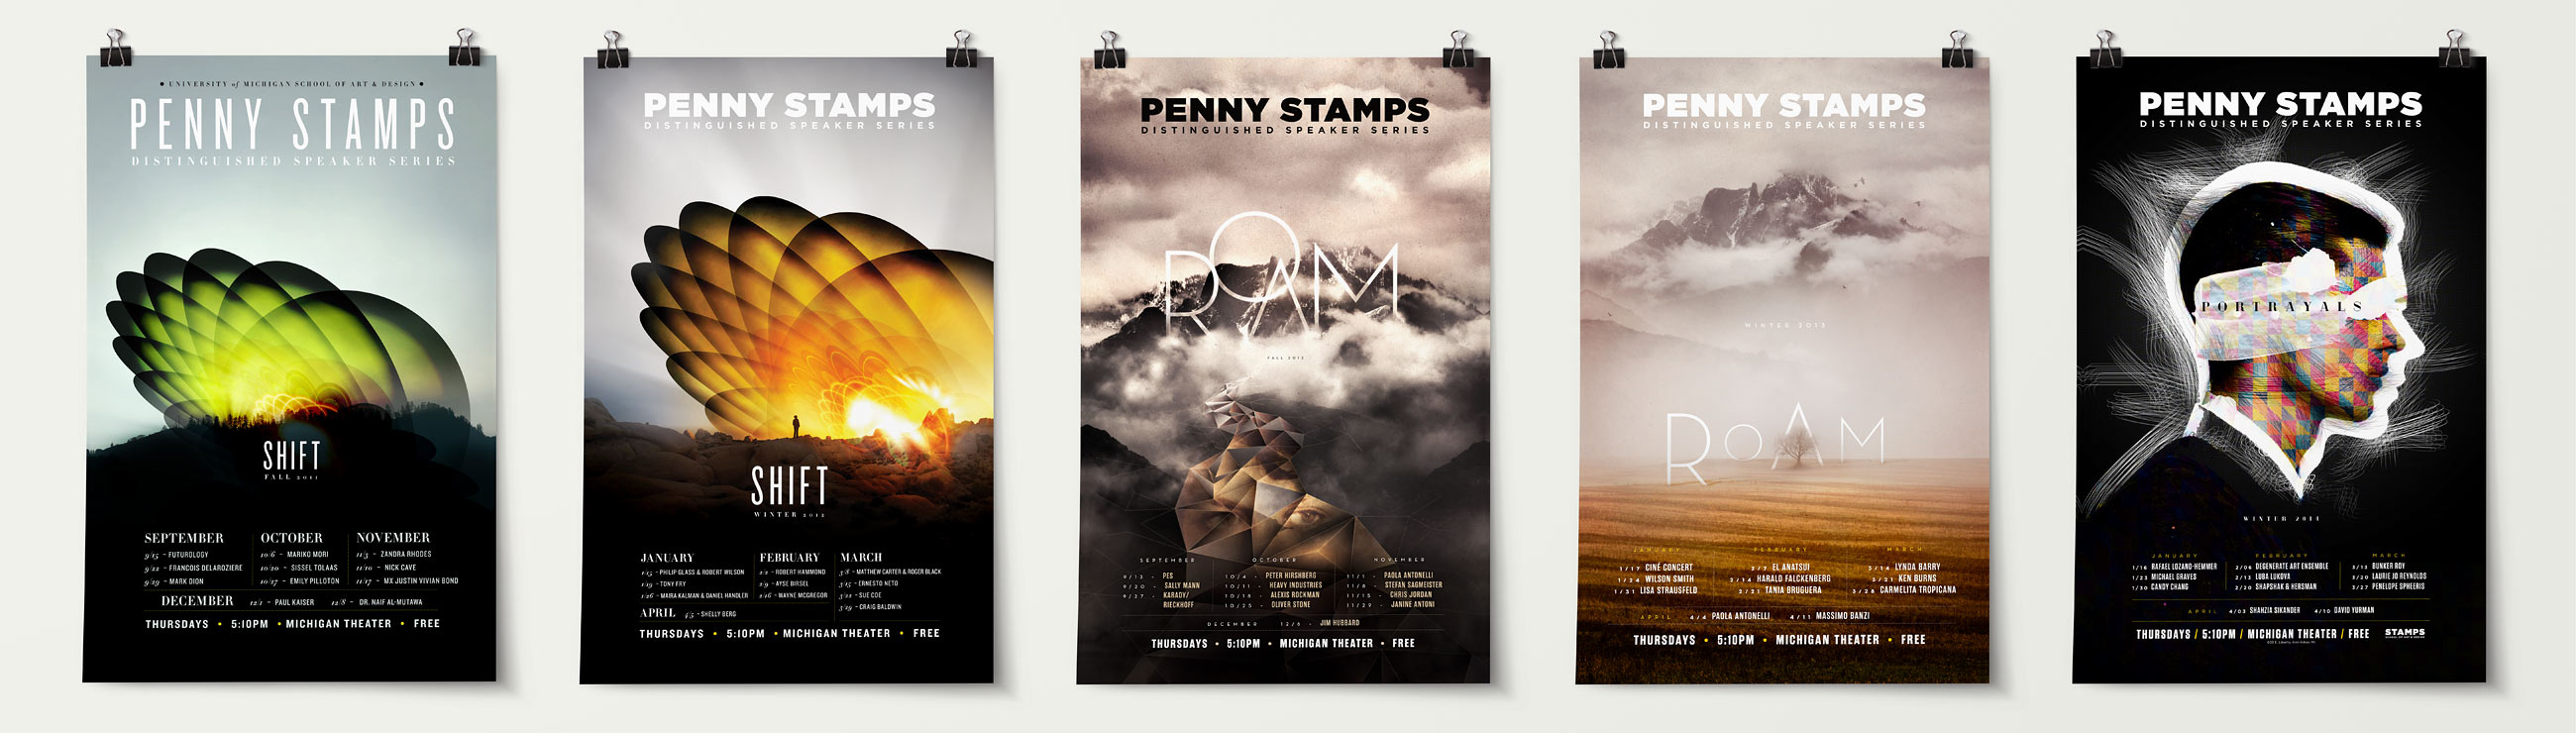 Penny-Stamps-Posters-1